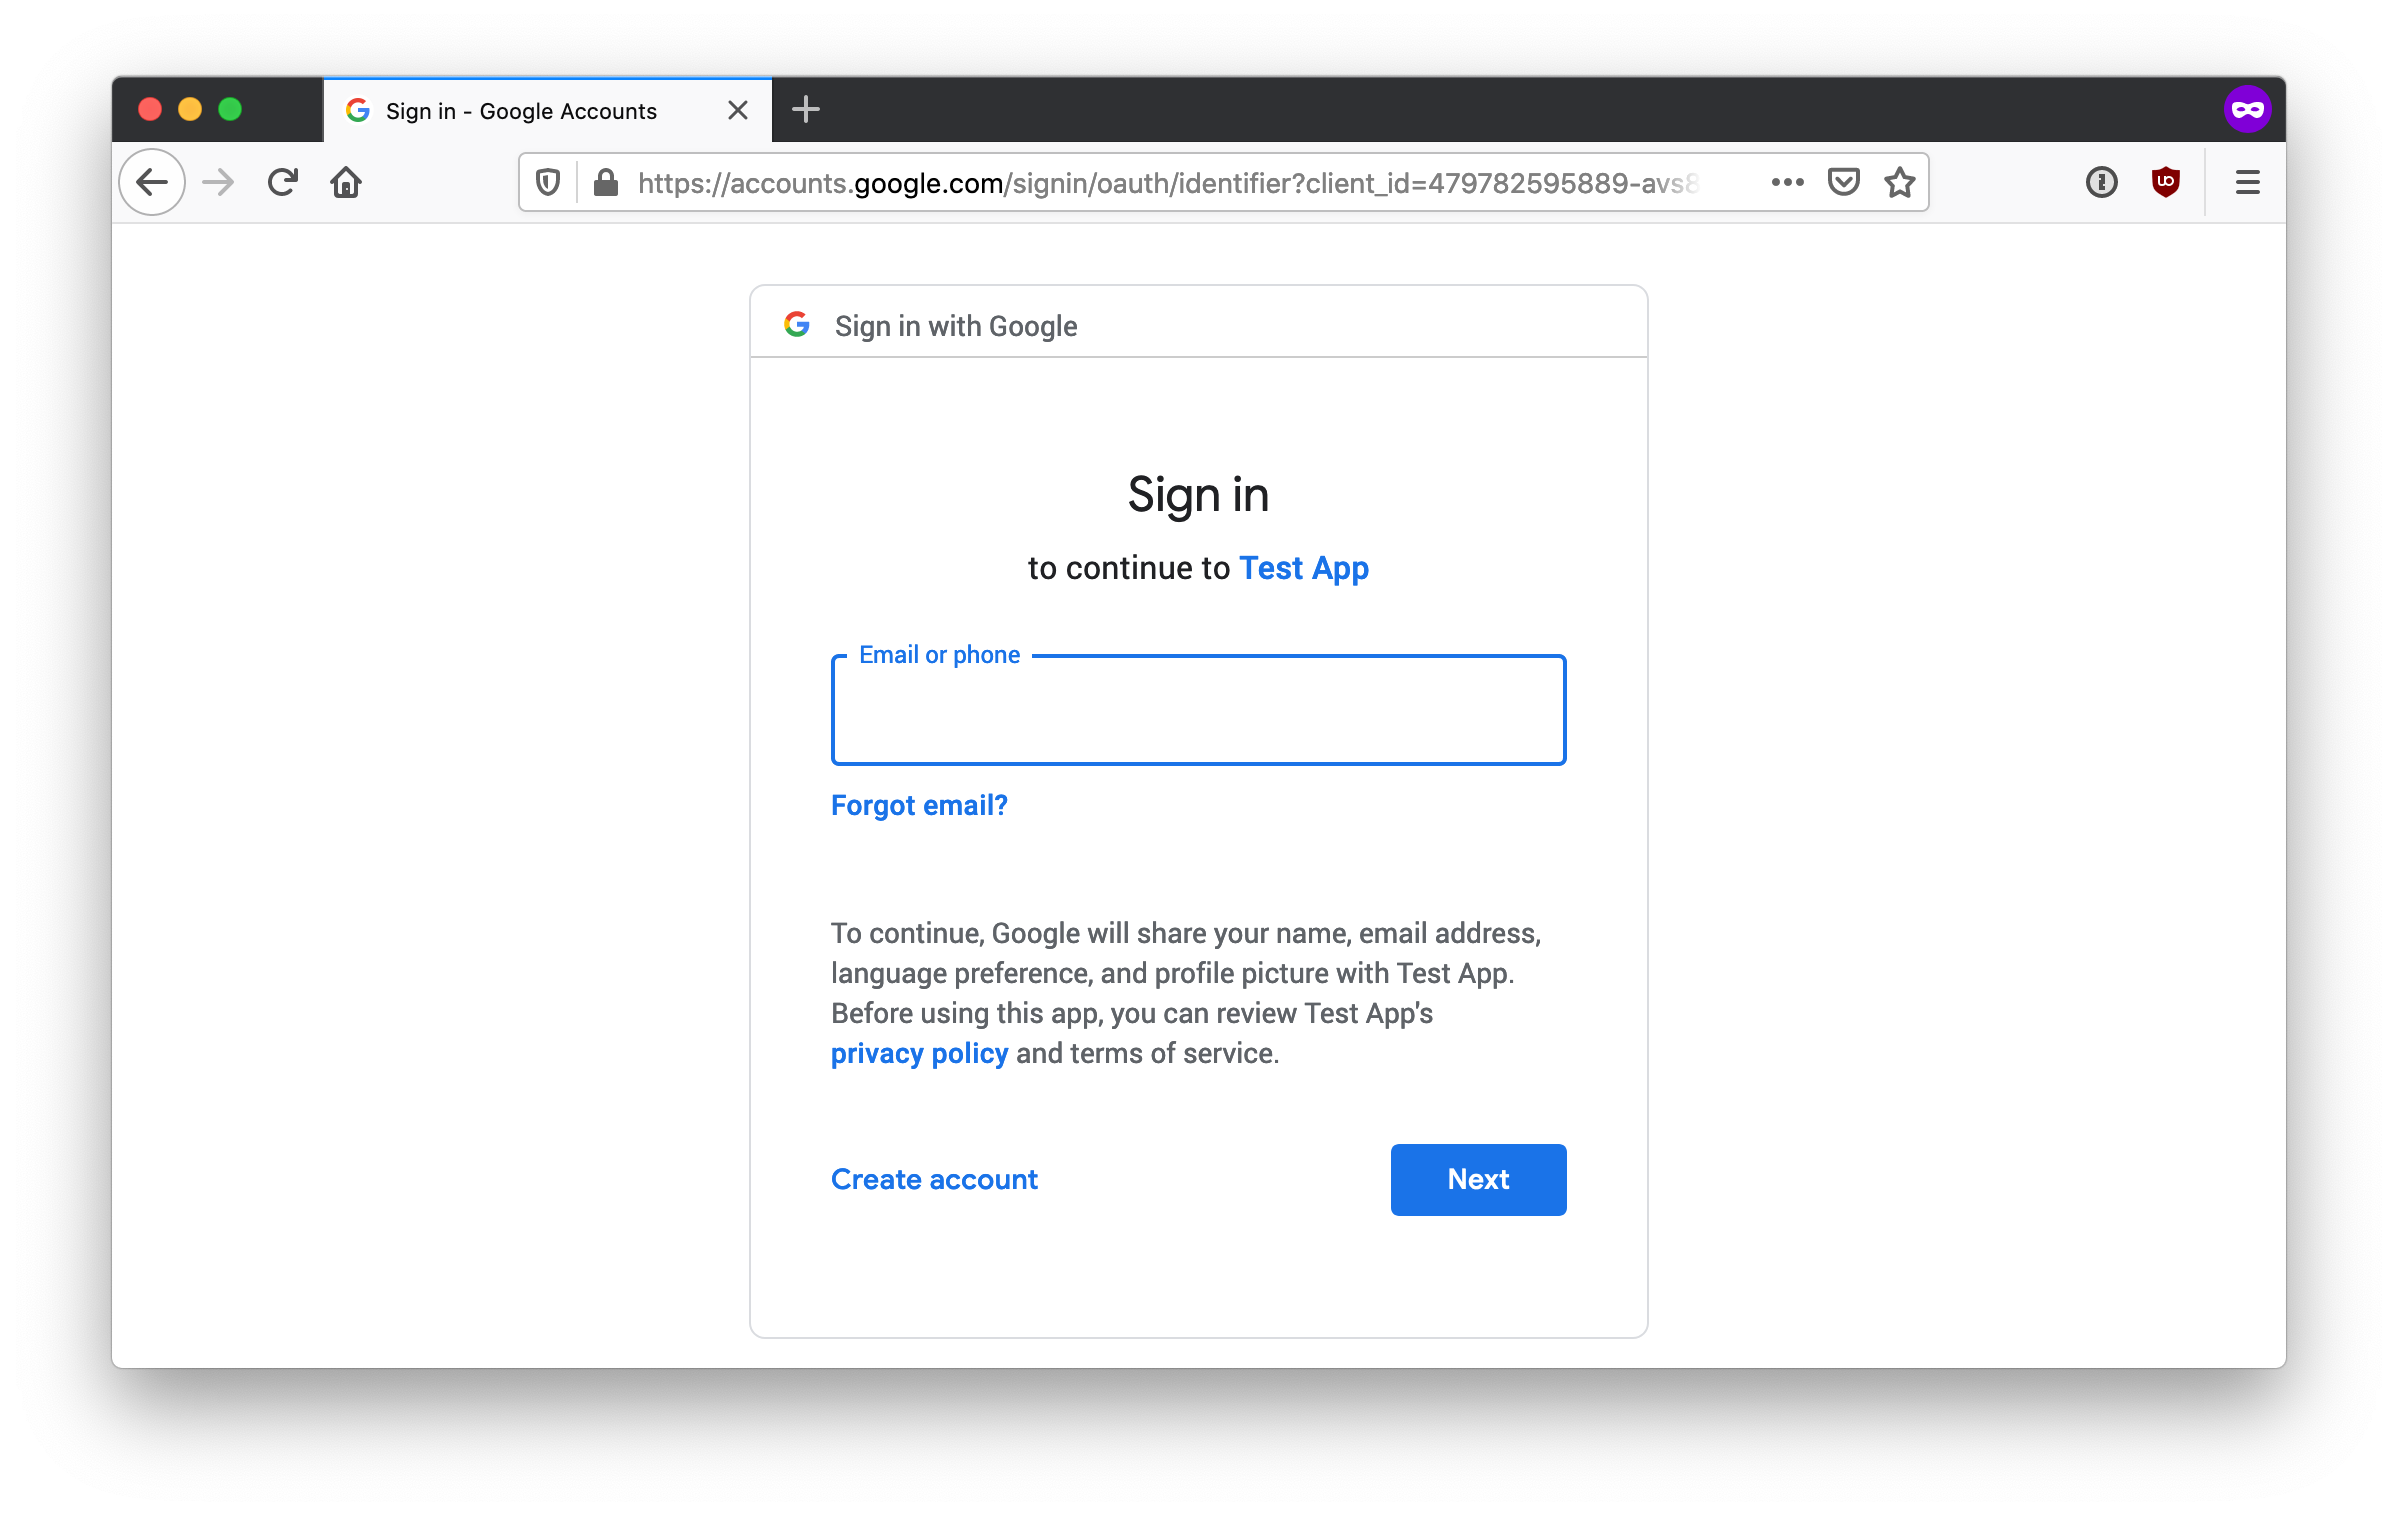 If you are not yet logged in, Google asks you to authenticate.